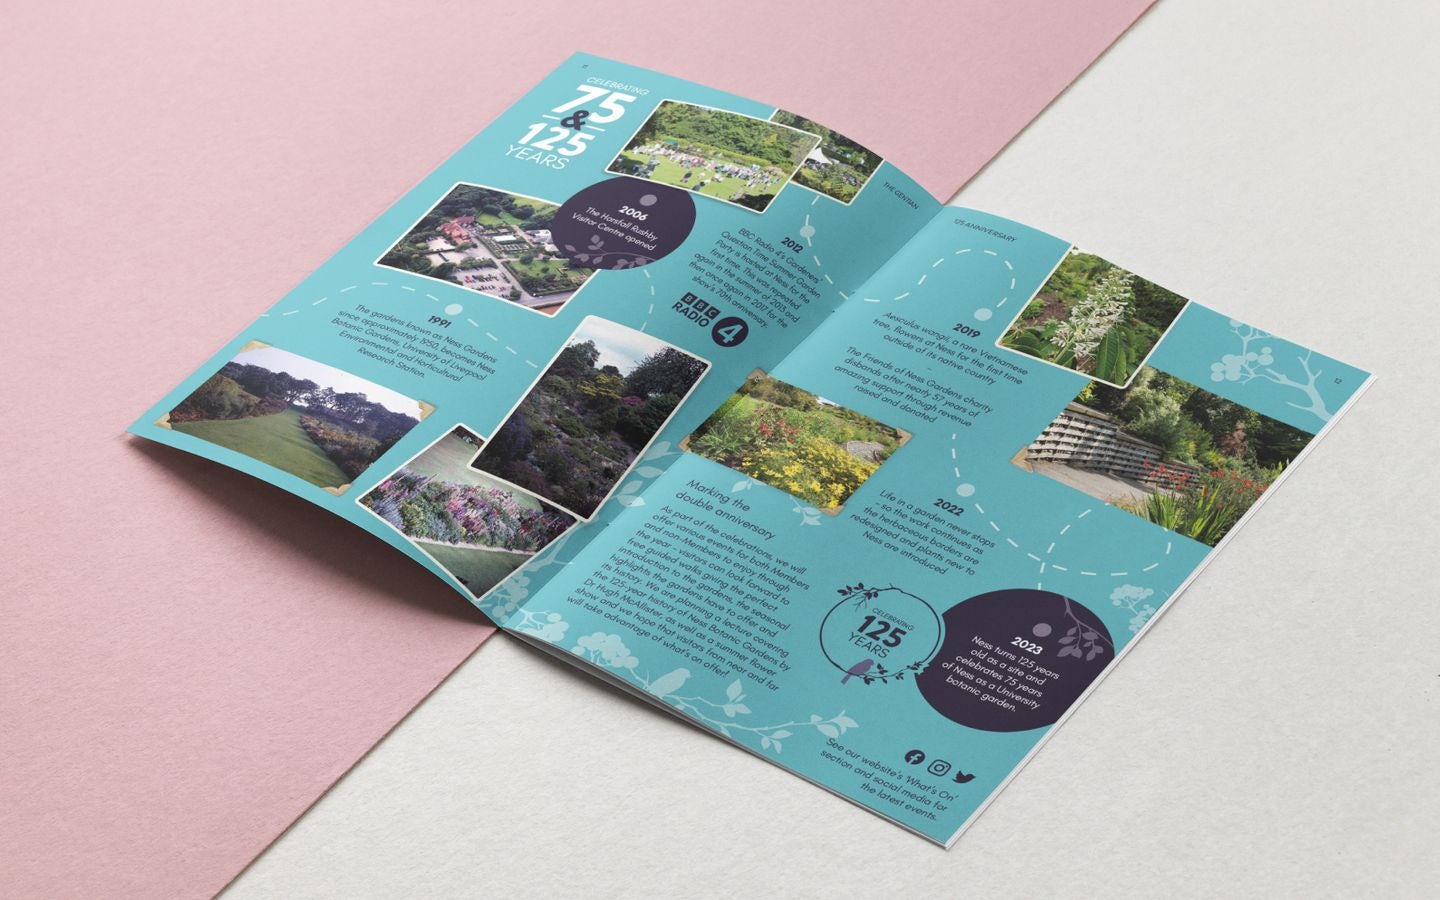 Promotional A4 brochure mockup for Ness Botanic Gardens, showcasing the garden's 125-year history with photos and milestones.